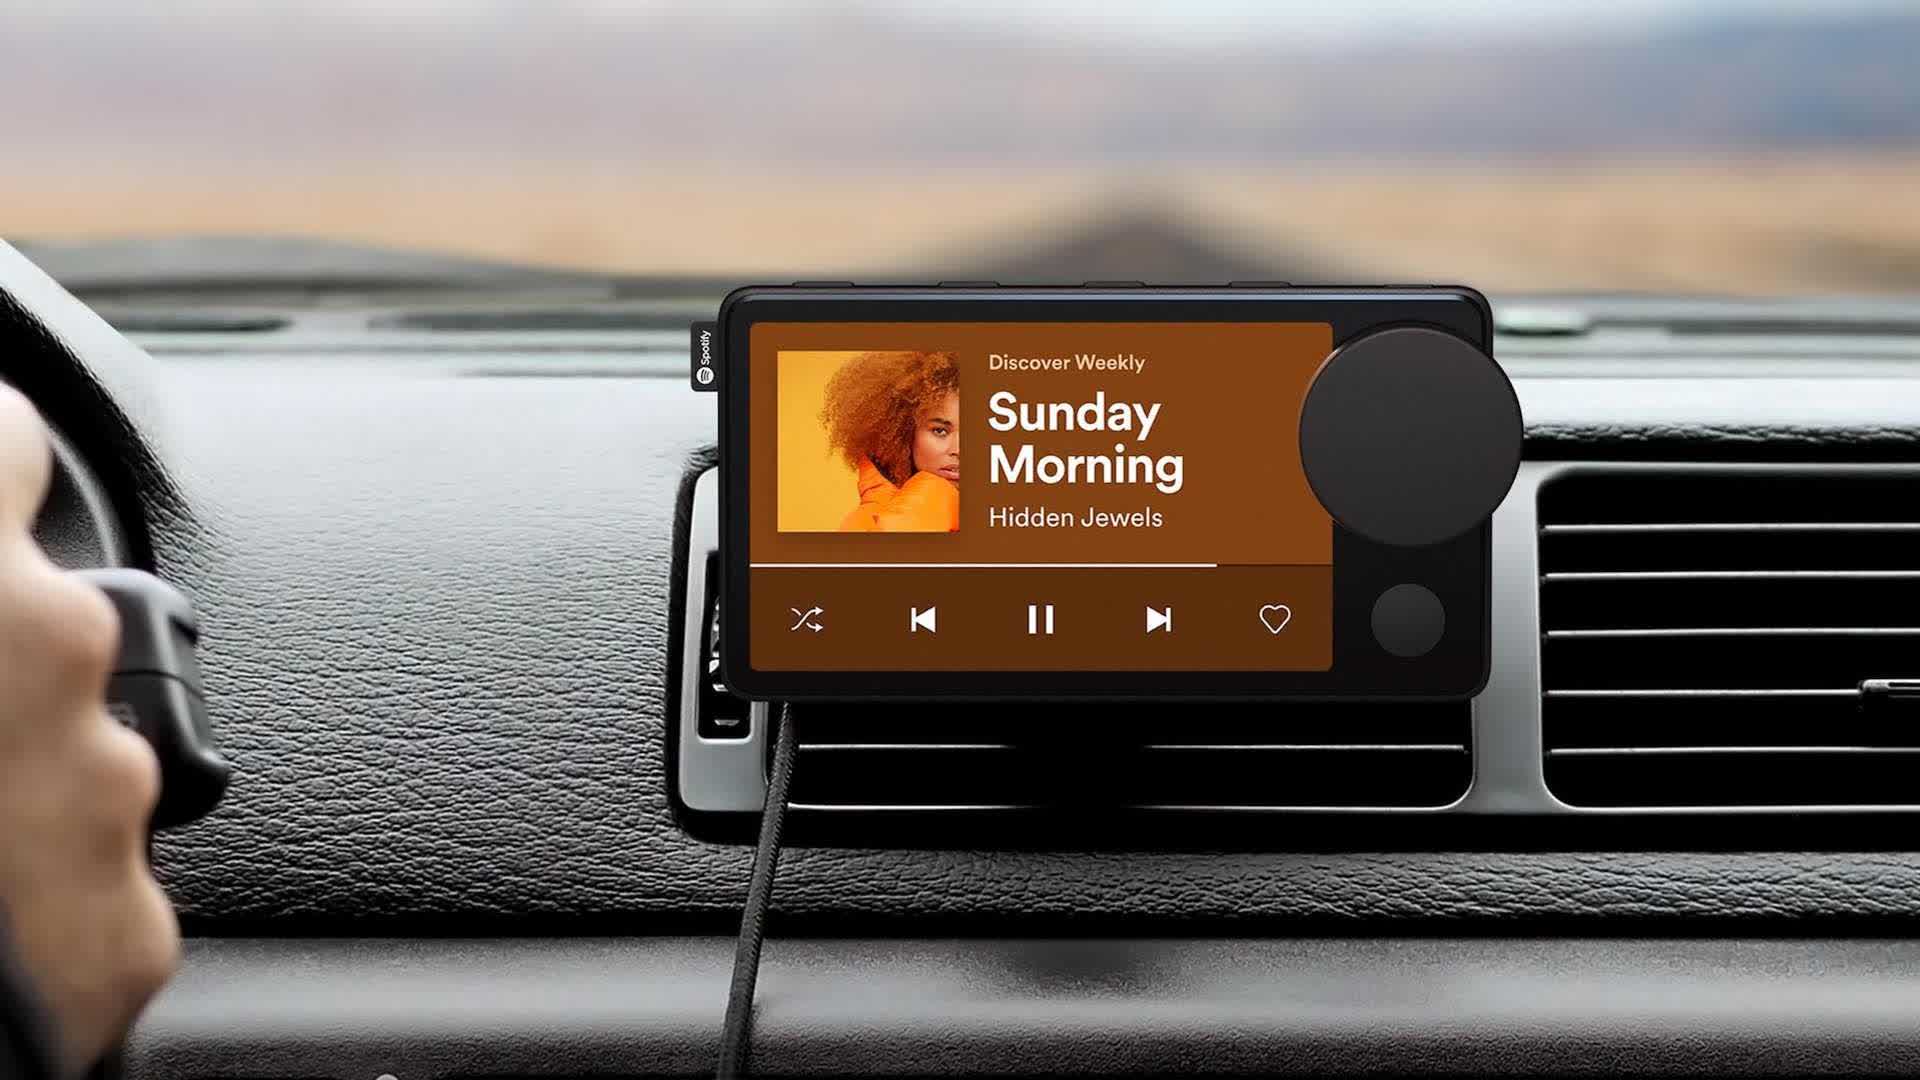 Spotify's Car Thing is now a proper consumer device